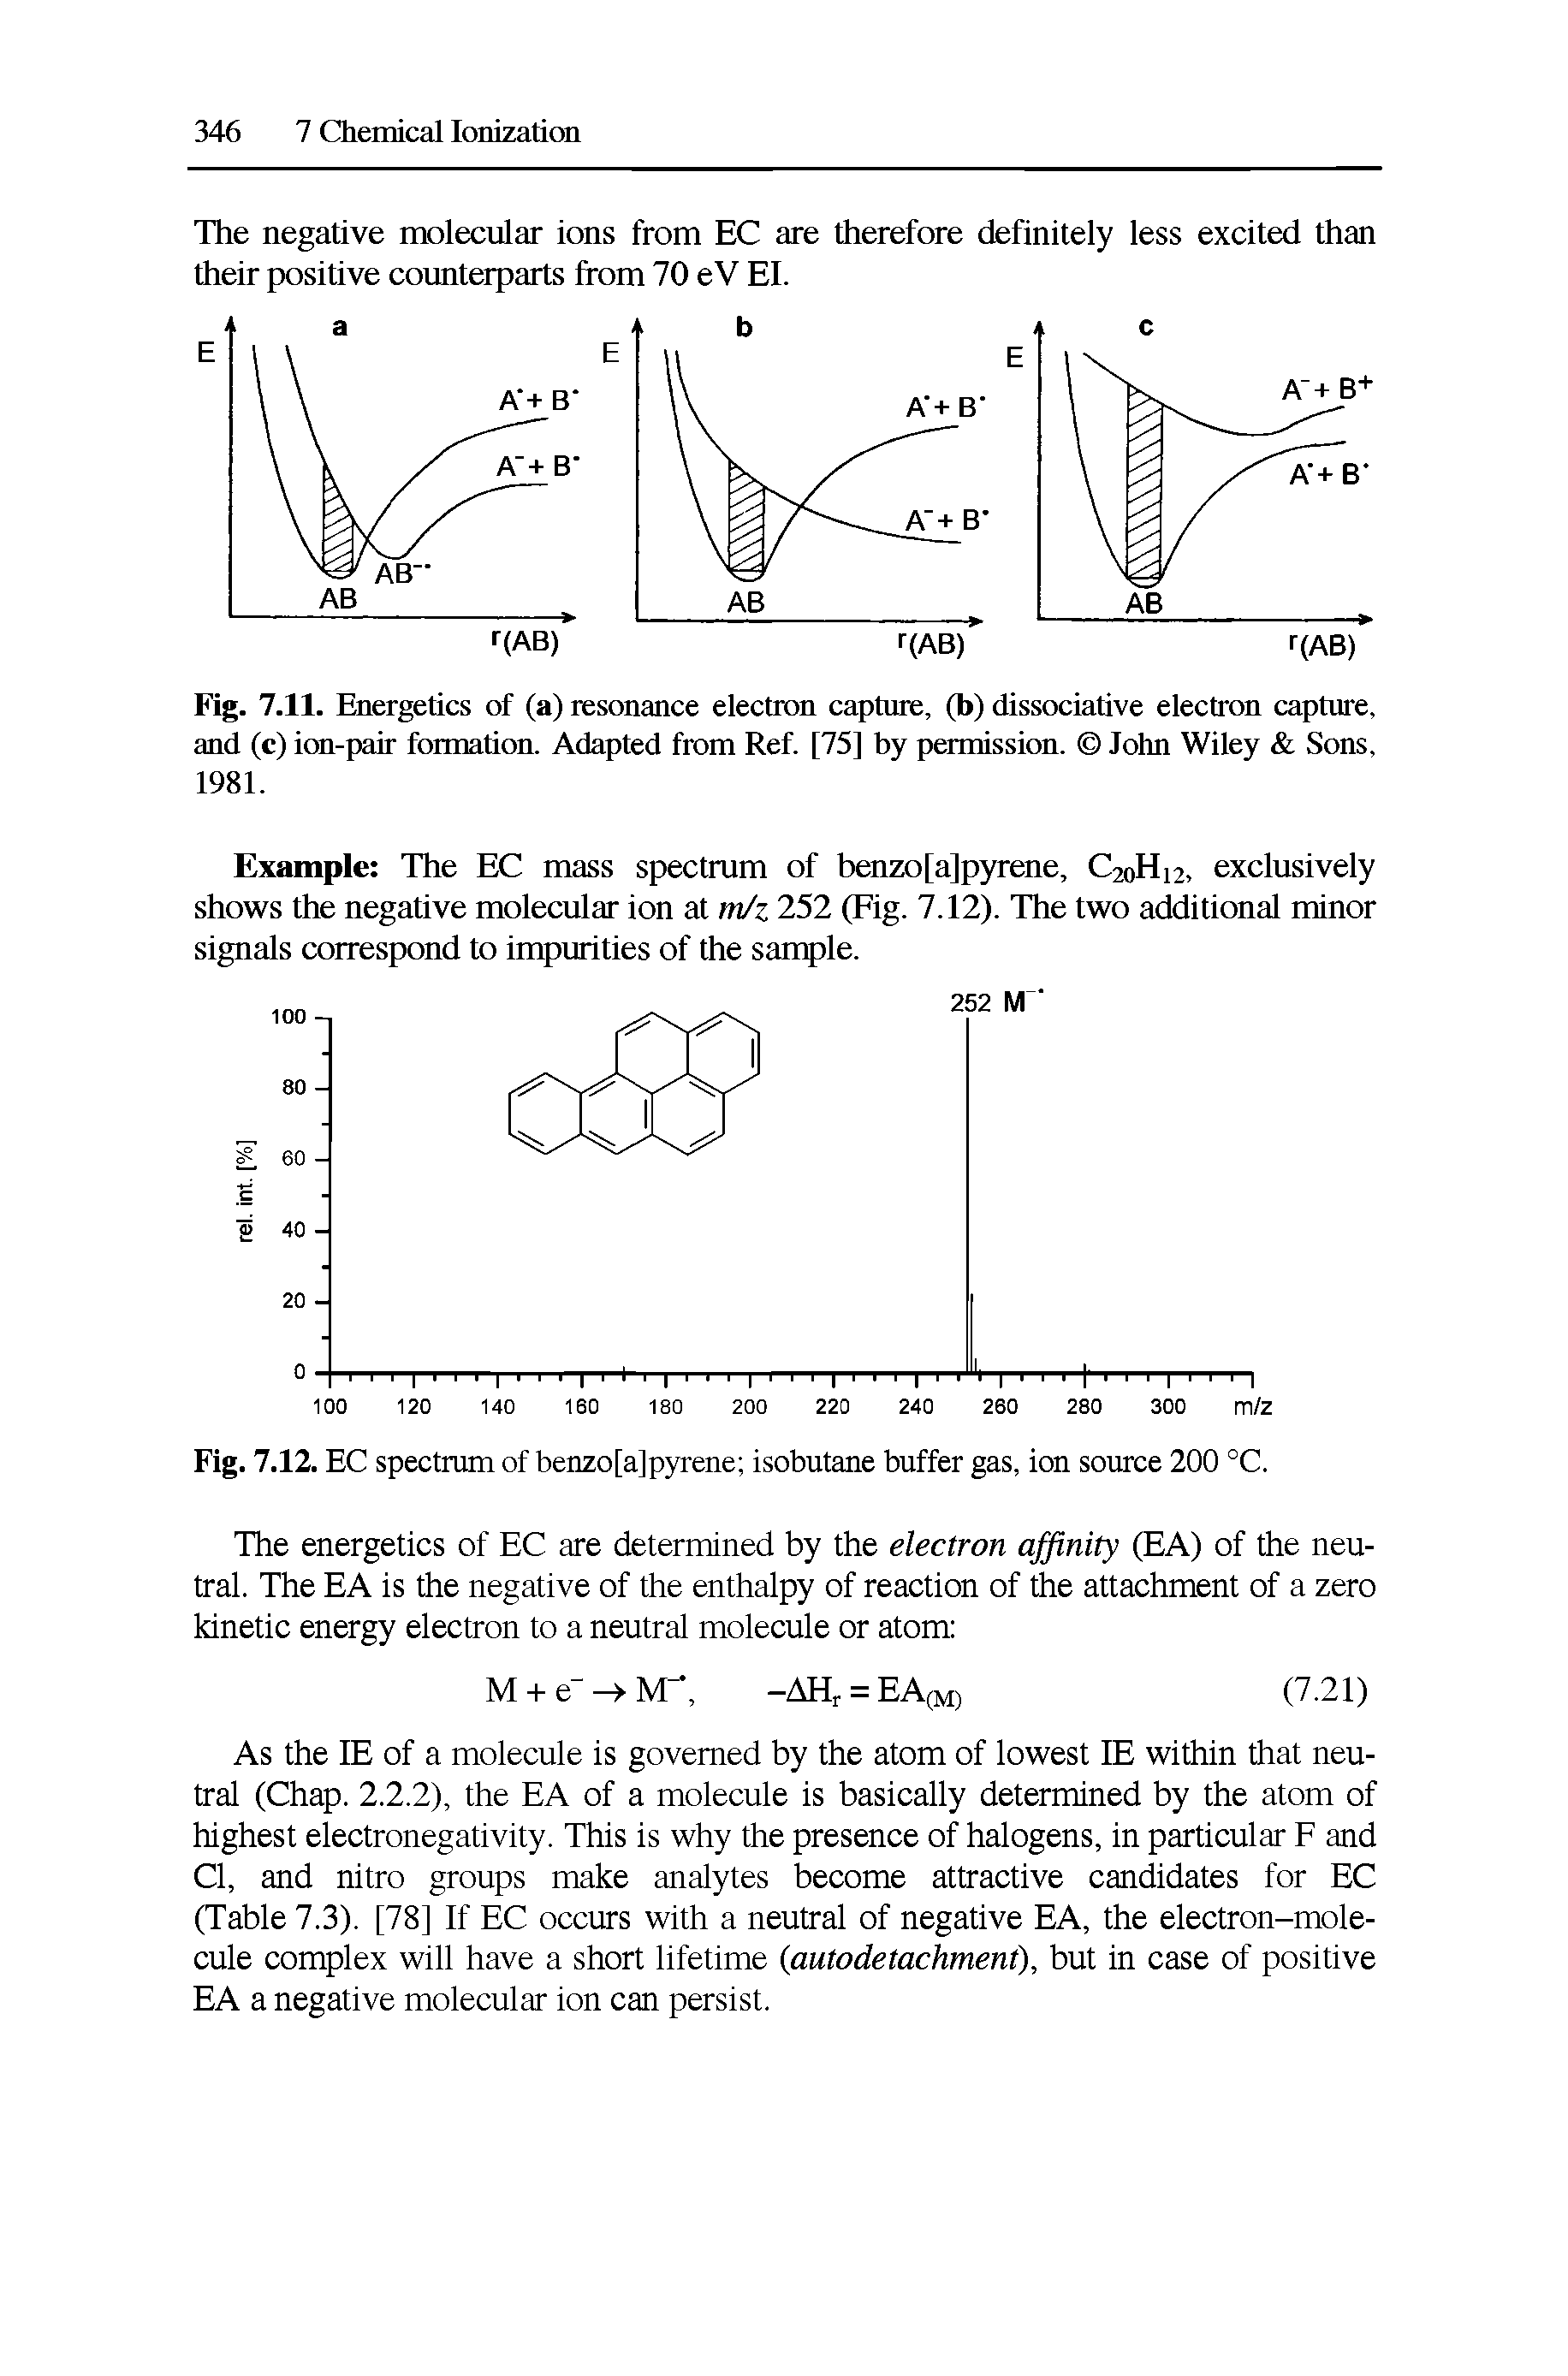 Fig. 7.11. Energetics of (a) resonance electron capture, (b) dissociative electron capture, and (c) ion-pair formation. Adapted from Ref. [75] by permission. John Wiley Sons, 1981.